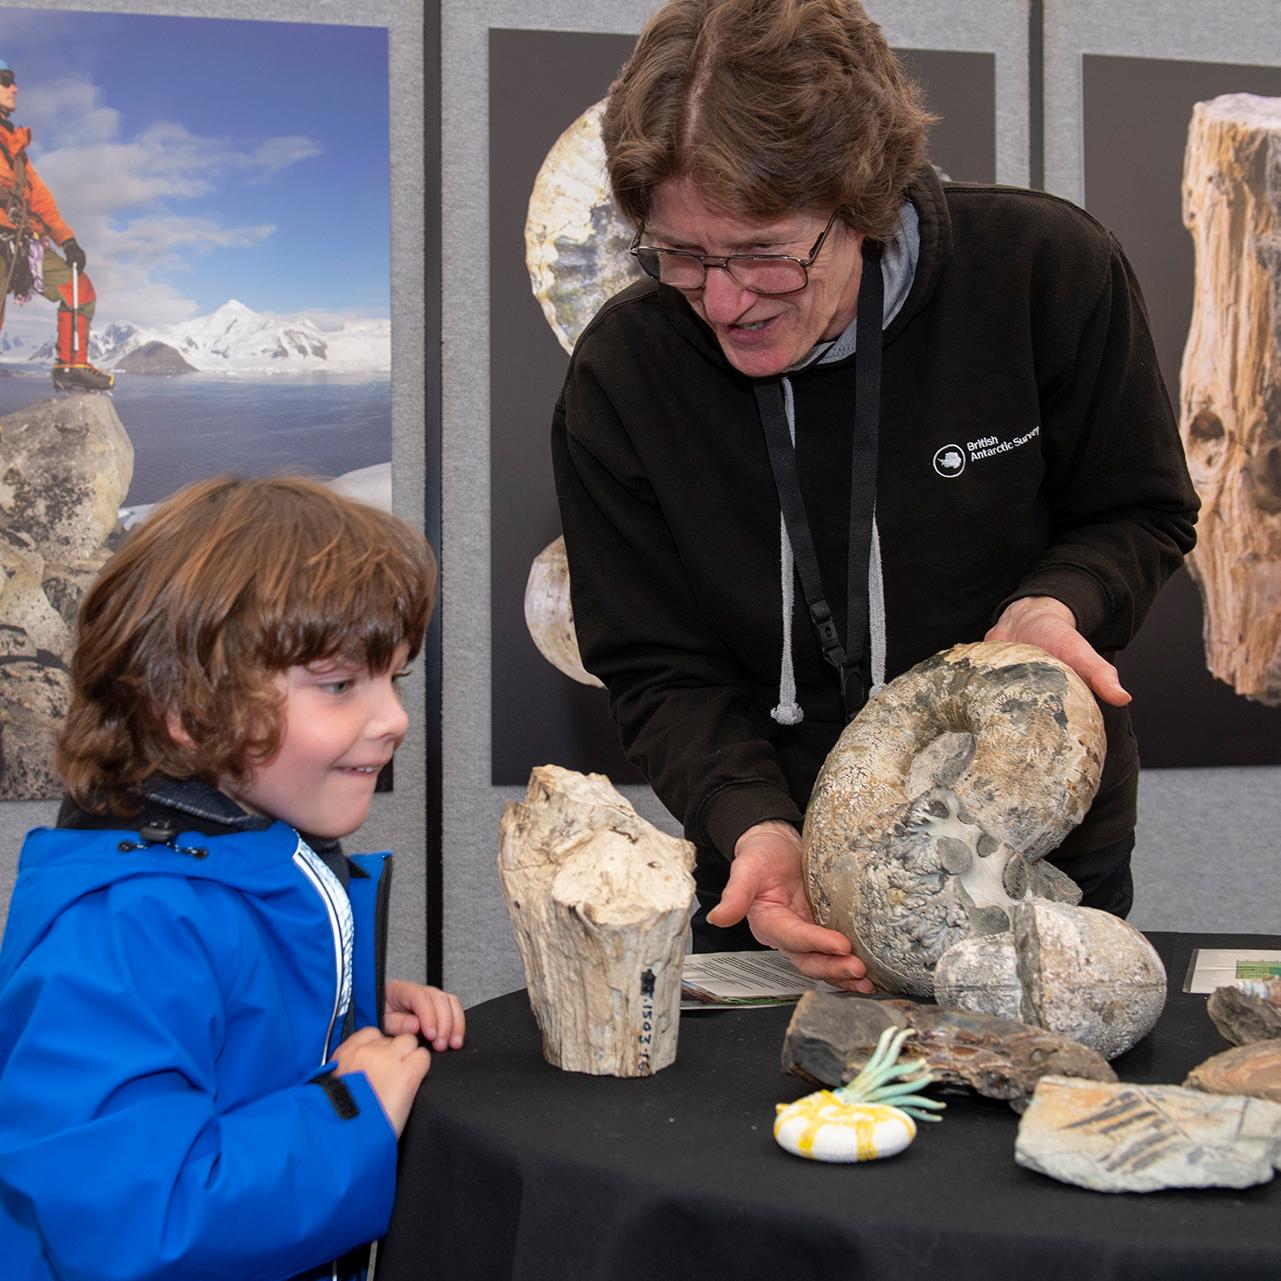 A young boy examines a fossil shown by a polar scientist as part of an event led by the British Antarctic Survey